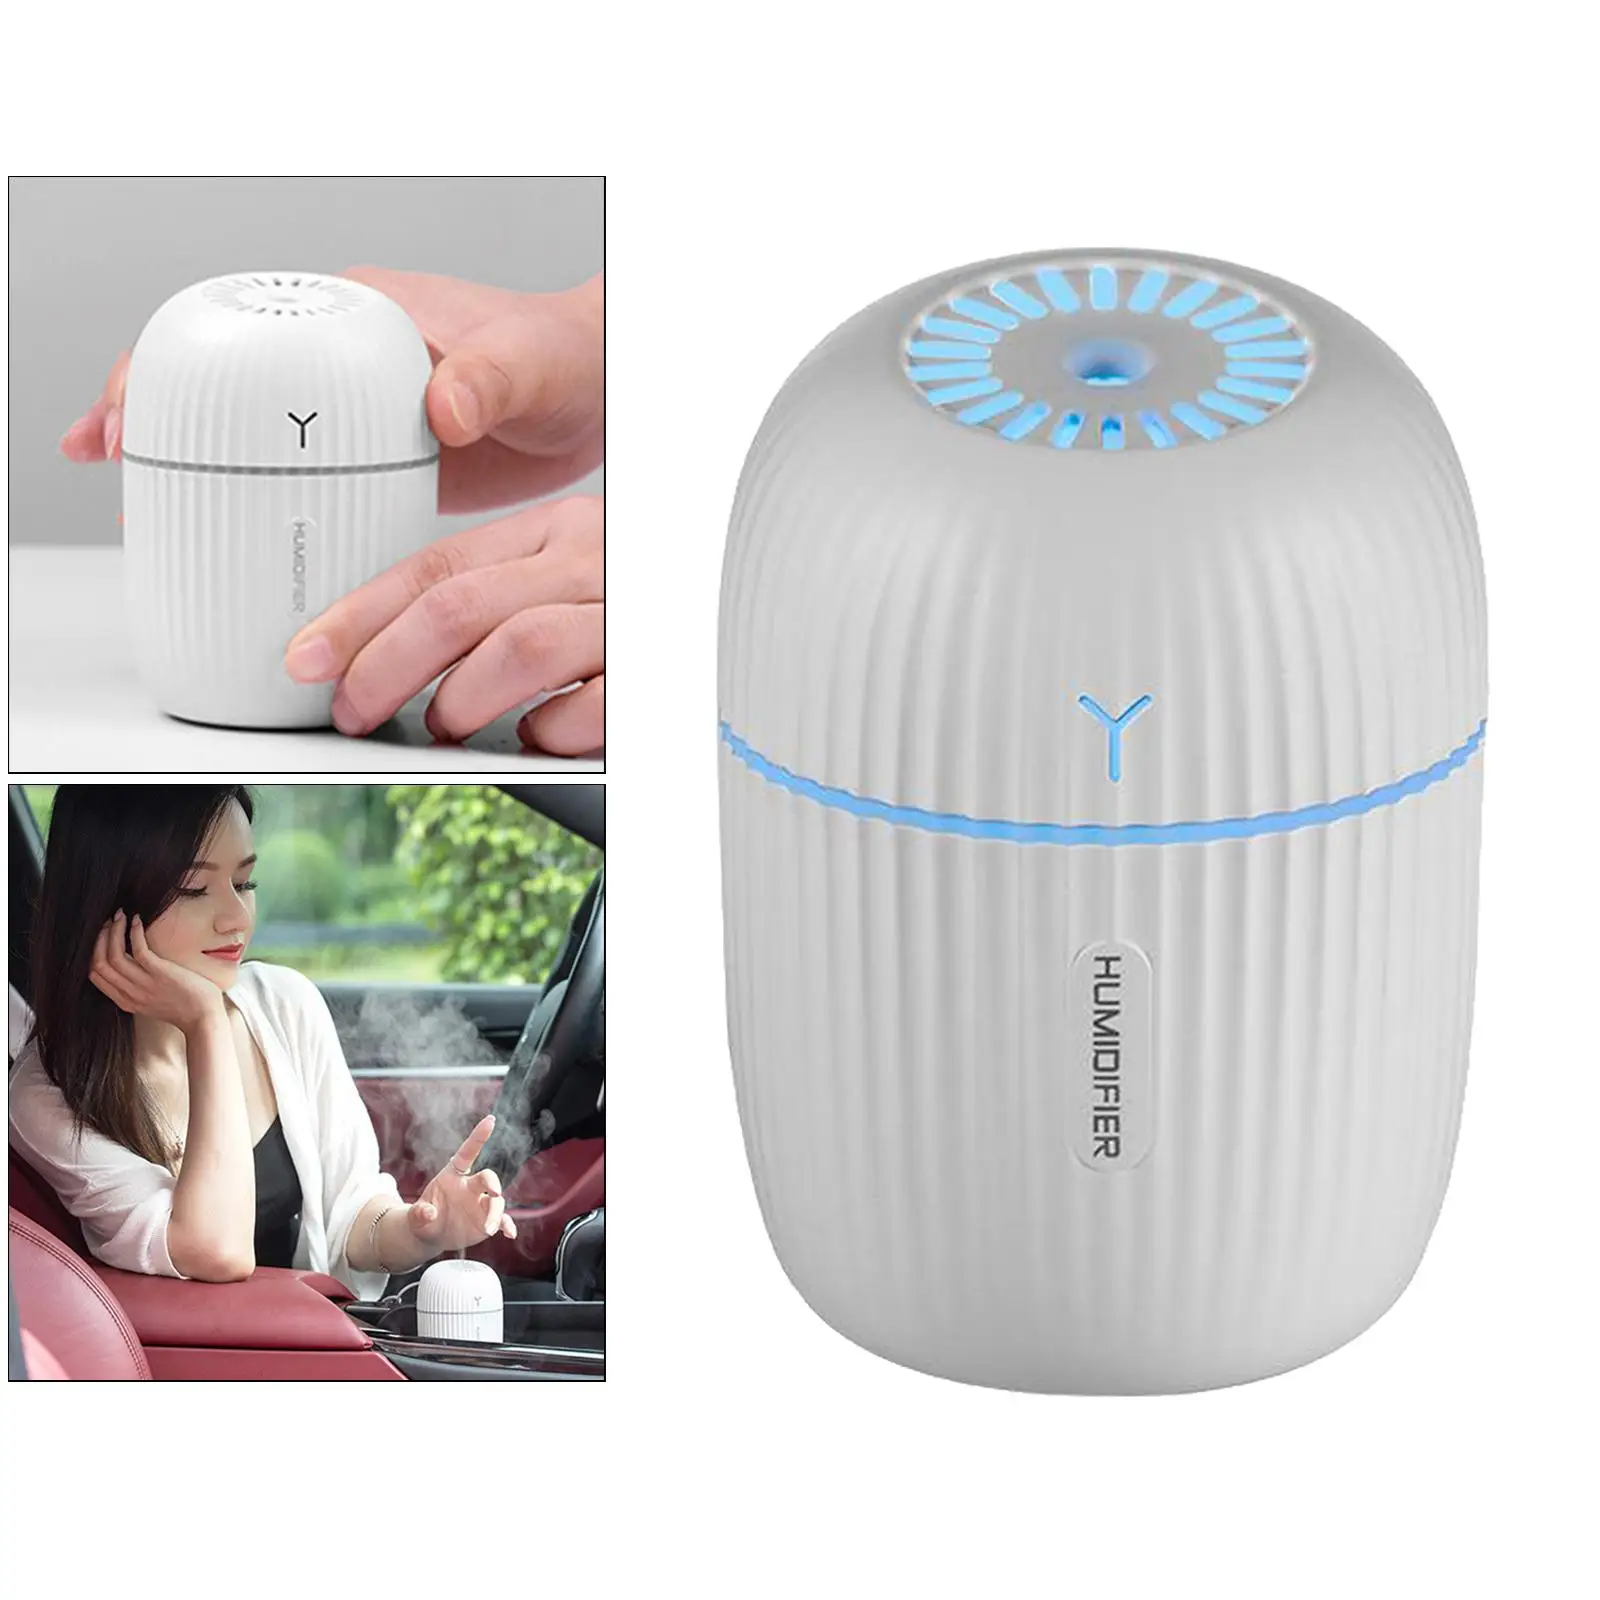 Portable Cool Mist 200/260ML Ultrasonic Humidifier Tabletop Night Light Home Office Use